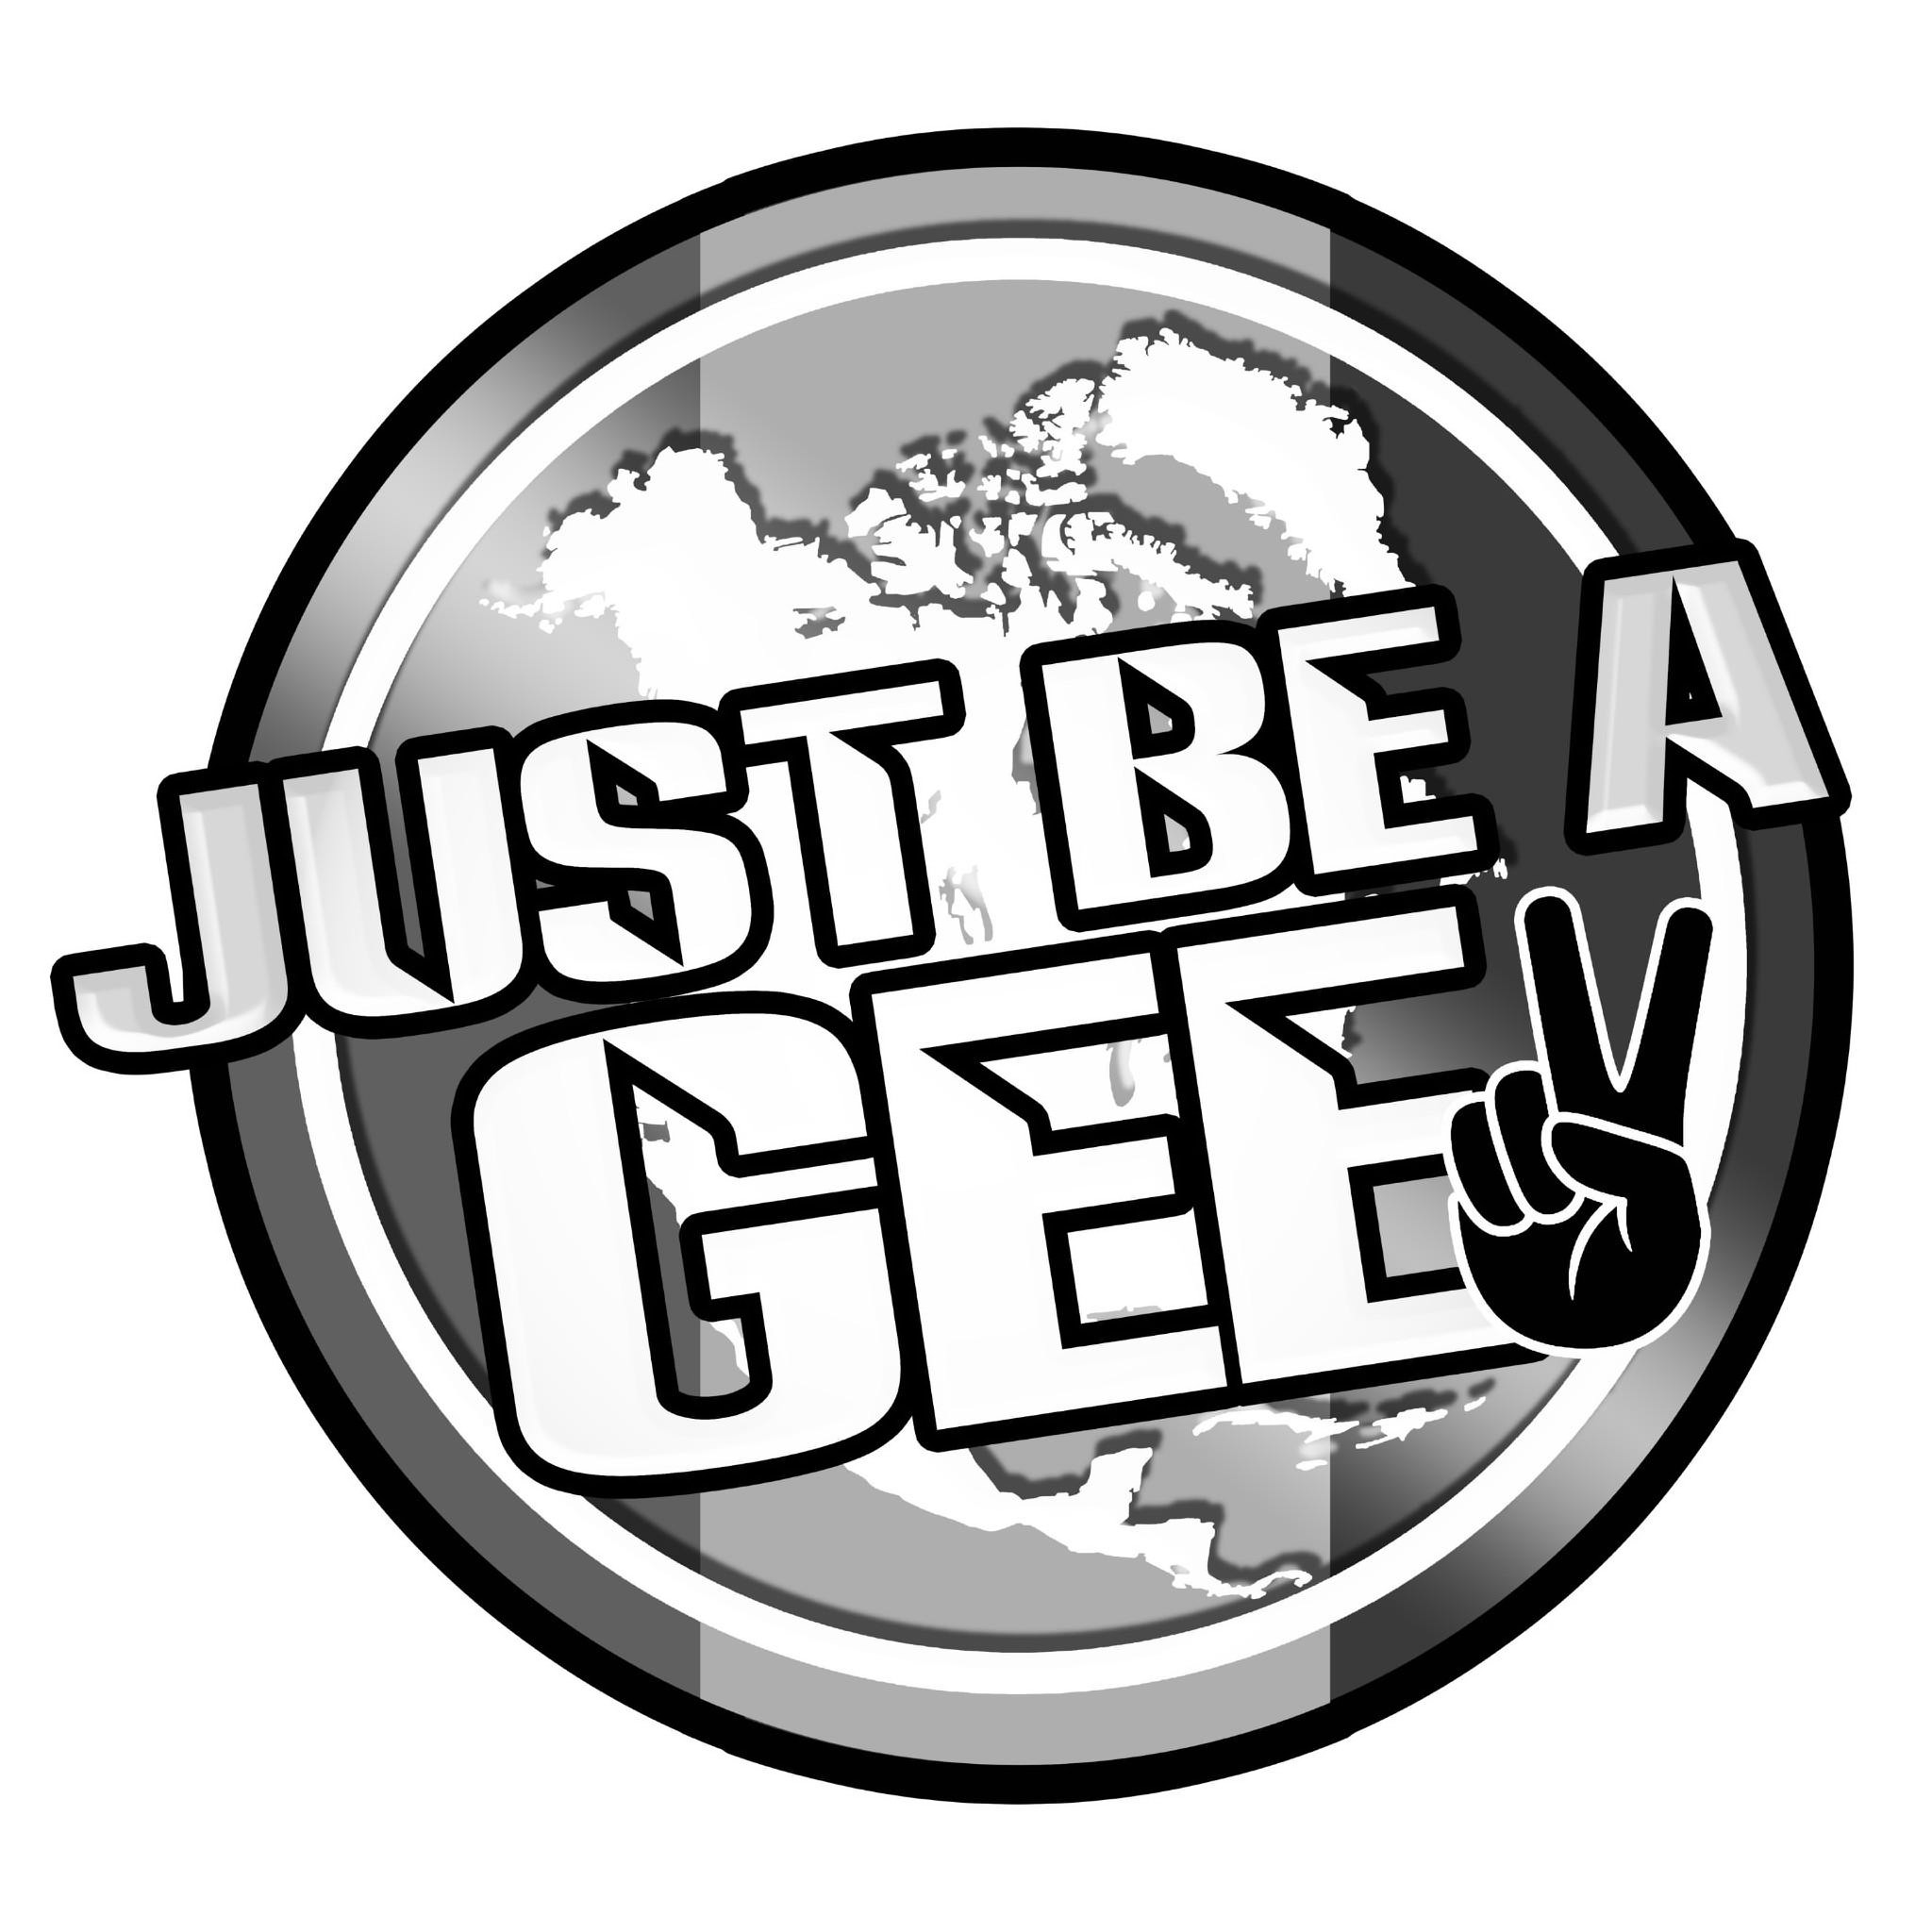  JUST BE A GEE